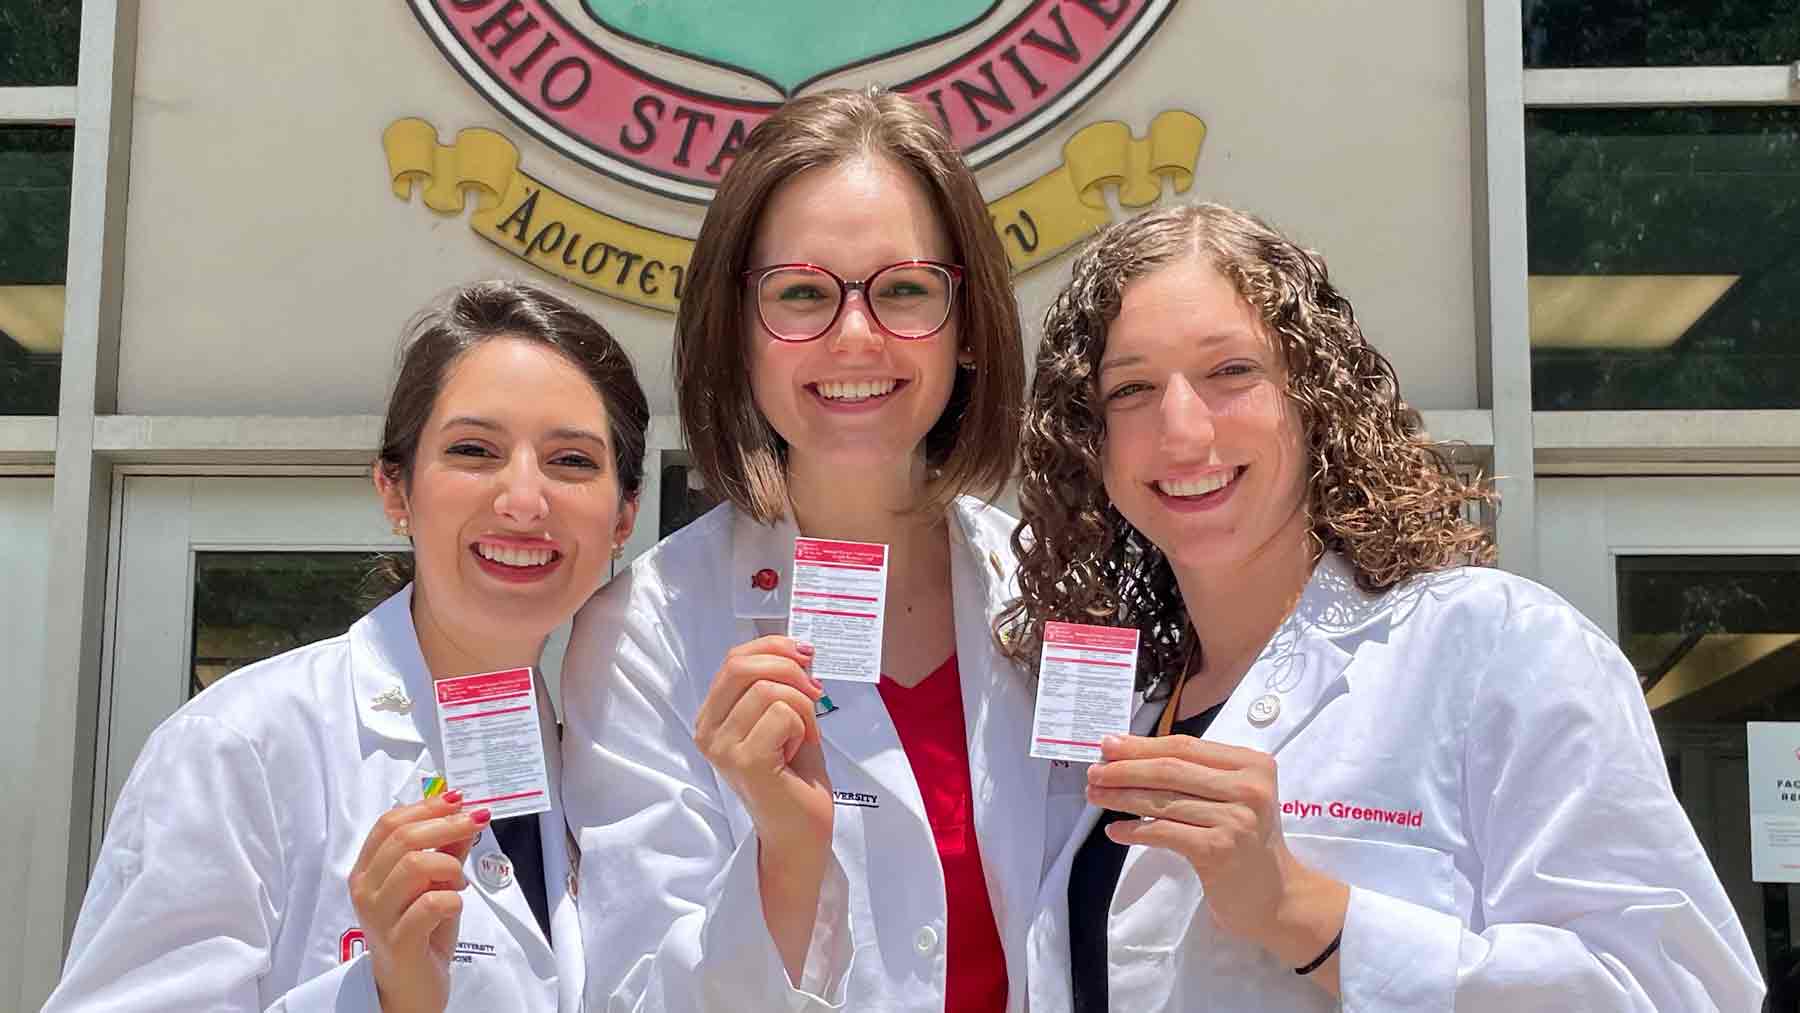 Three women in white coats holding resource cards